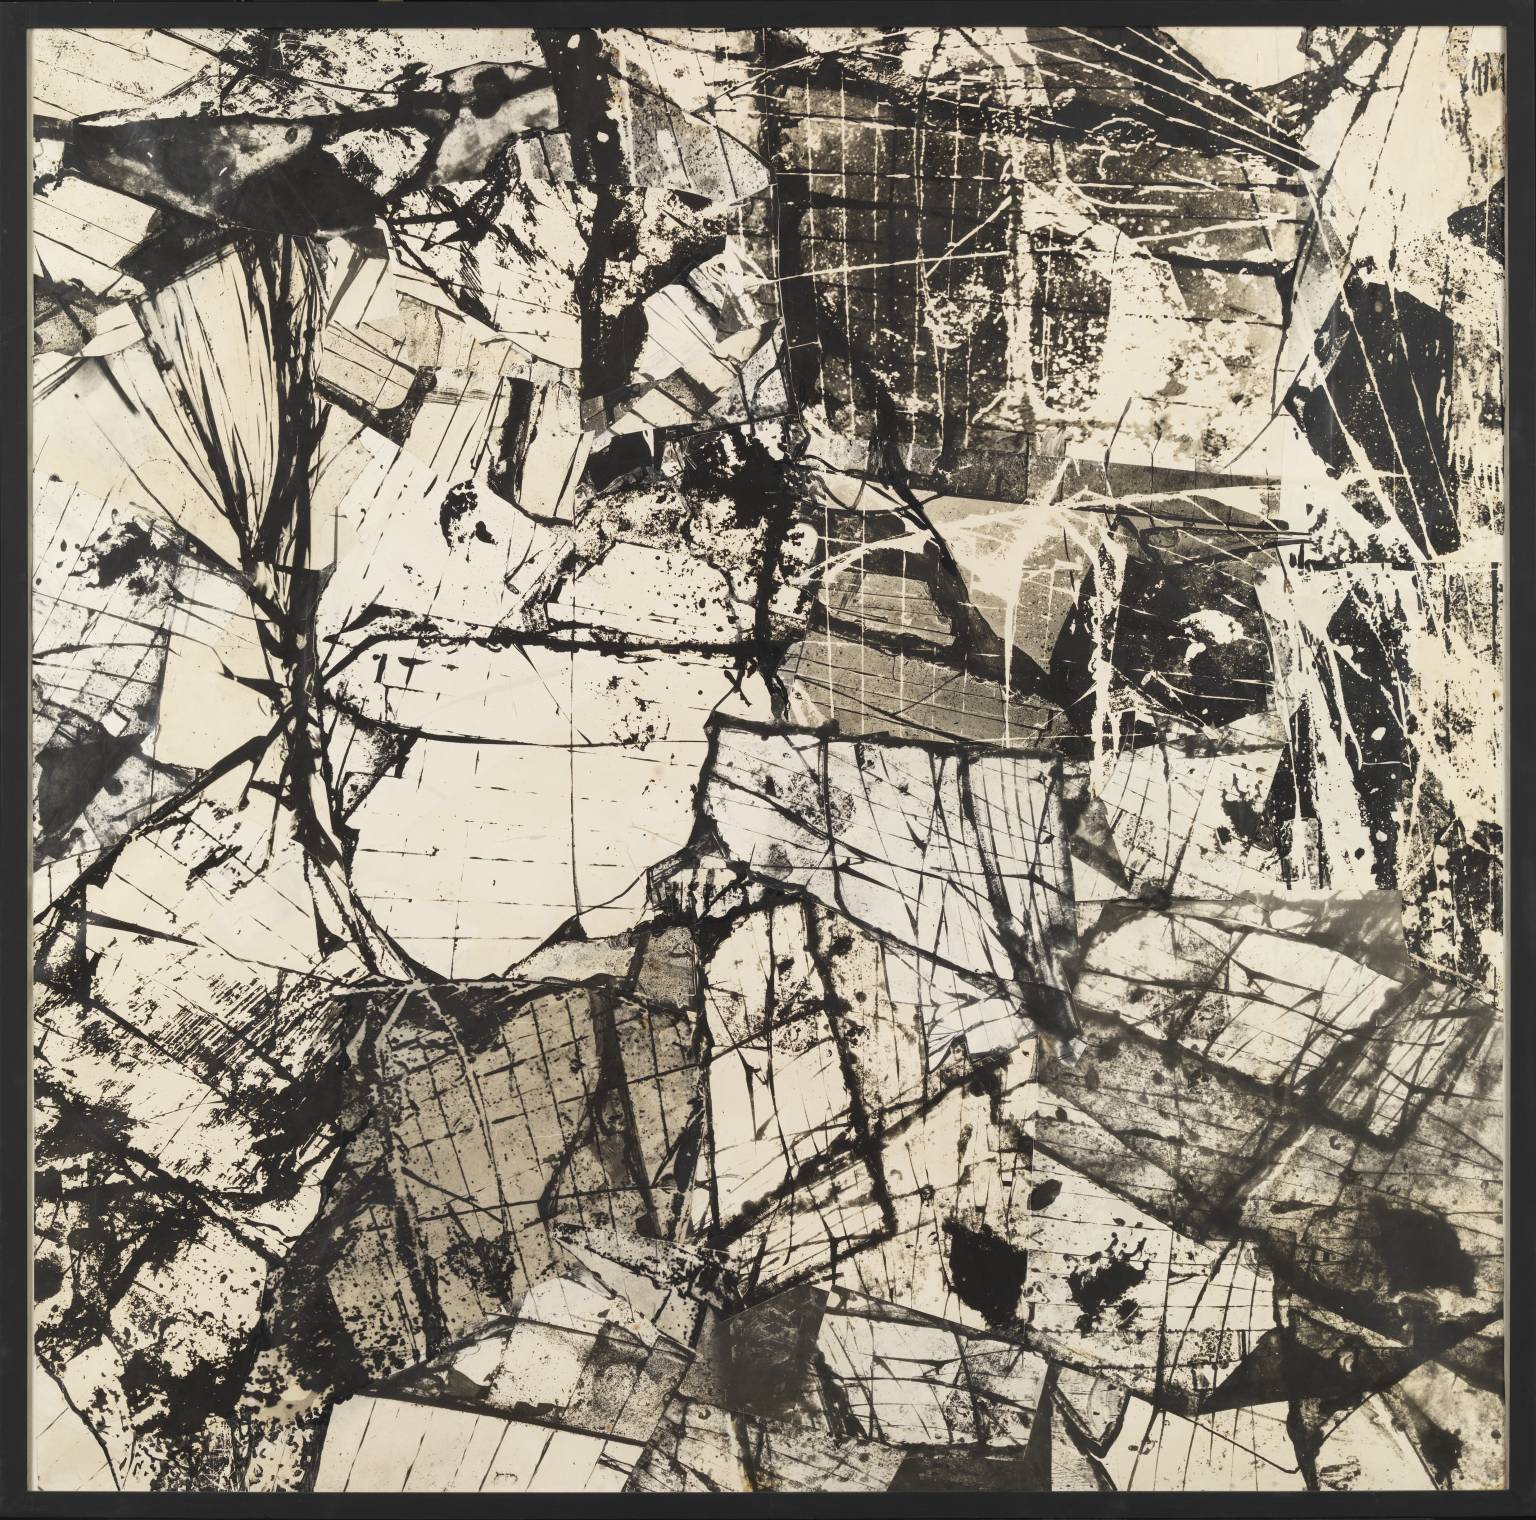 Untitled No. 8 (Shattered Glass)', Nigel Henderson, 1959 | Tate